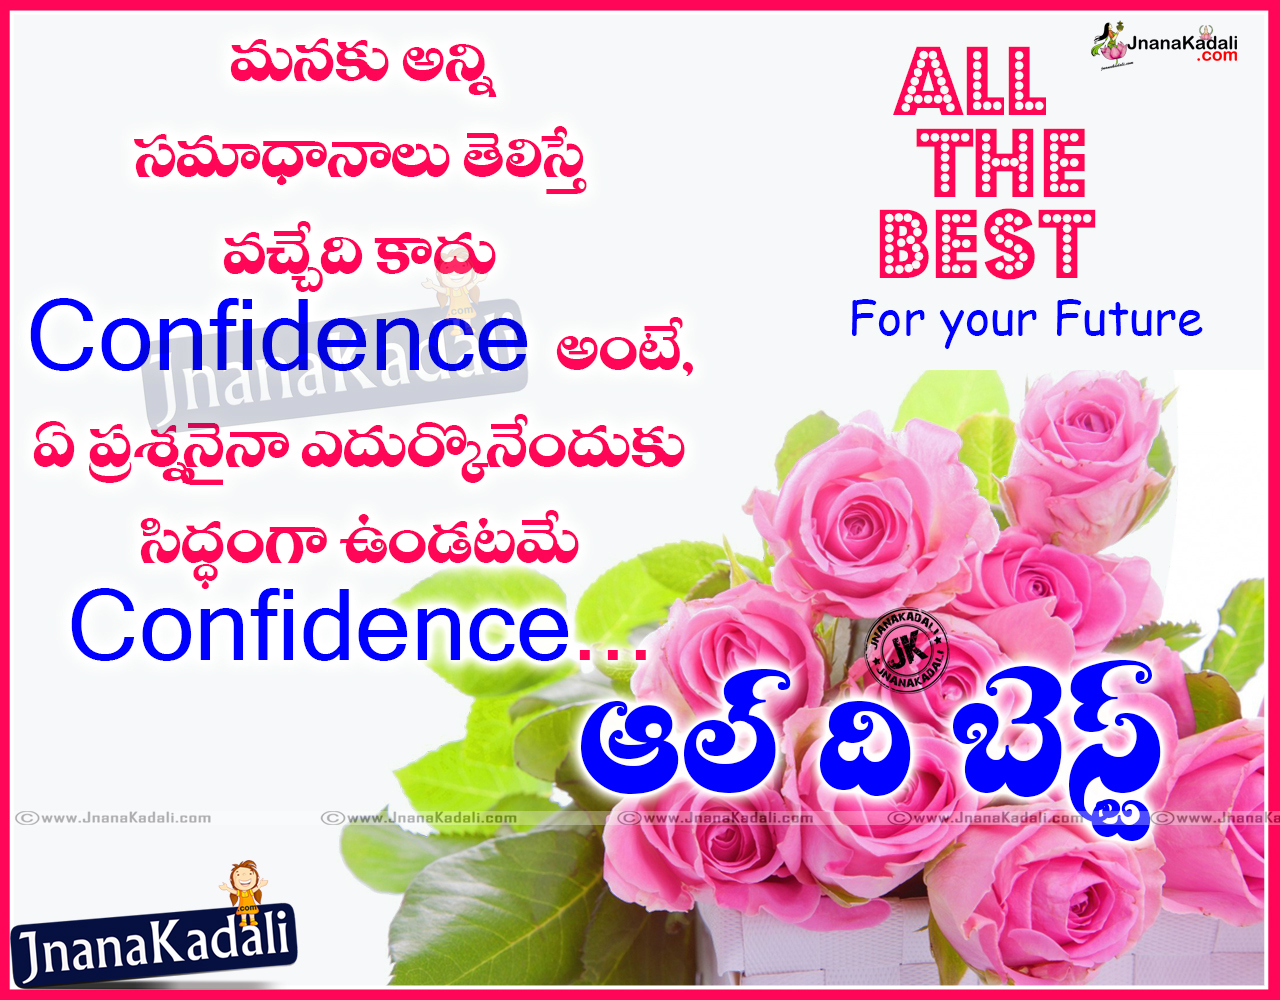 Telugu New All The Best Inspiring Quotes for Friend New Job All the best messages